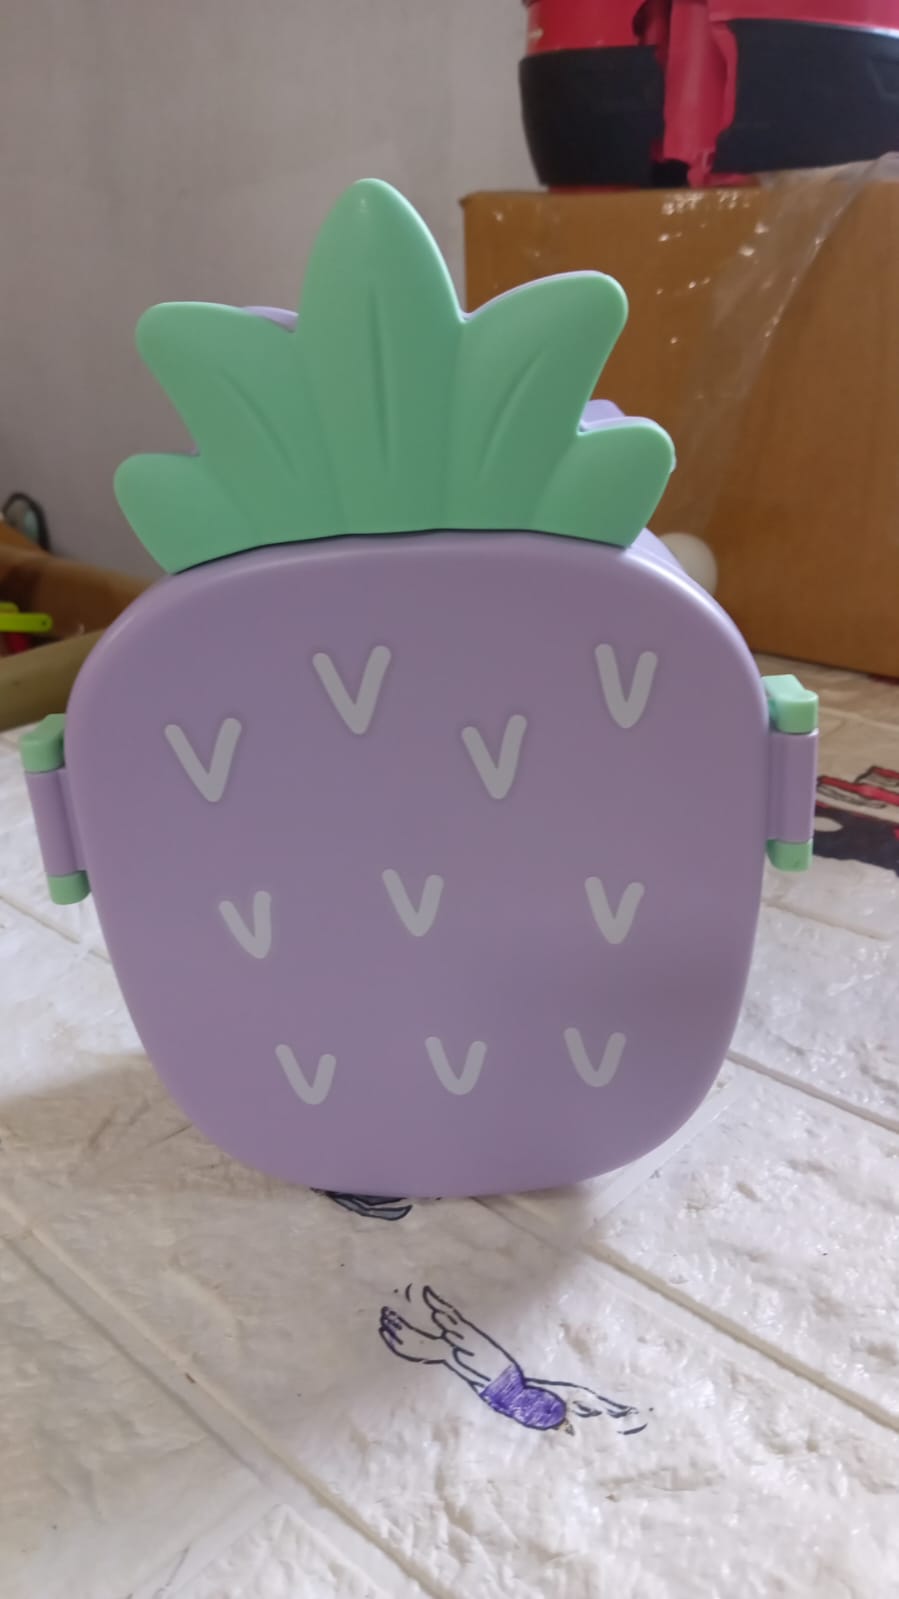 Pineapple Shaped Lunch Box with Compartments Lunch Food Container with Box Portable Lid School & Kids Lunch Box